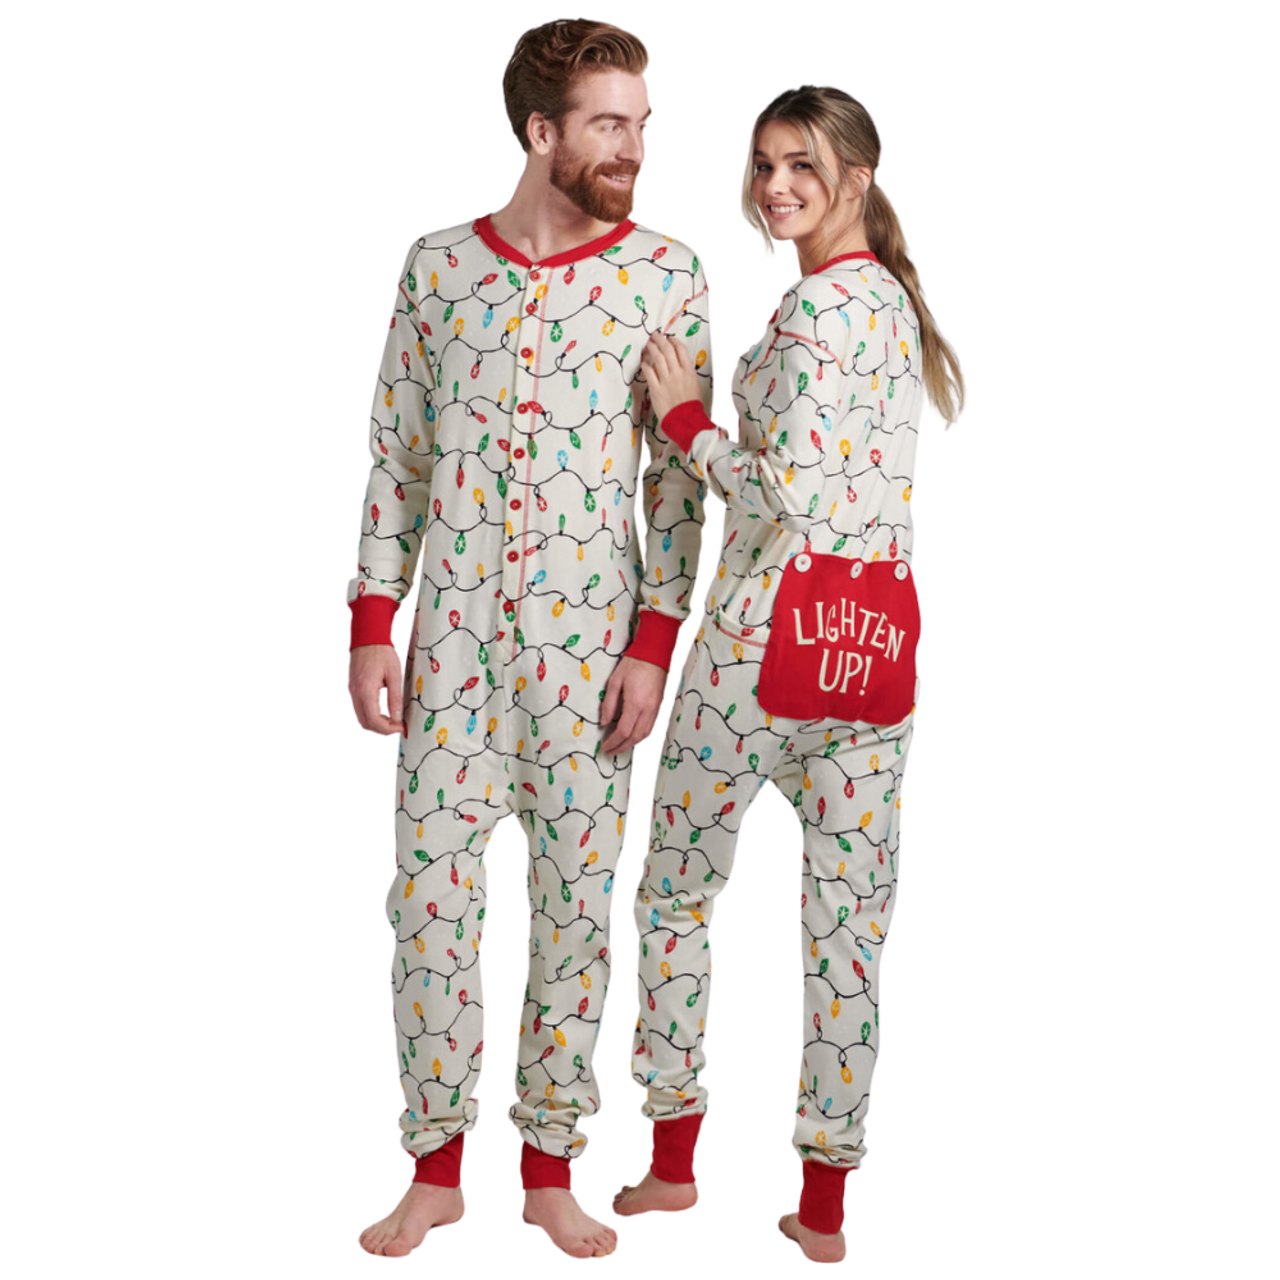 Holiday Moose on Plaid Baby Christmas Onesie Union Suit PJs by